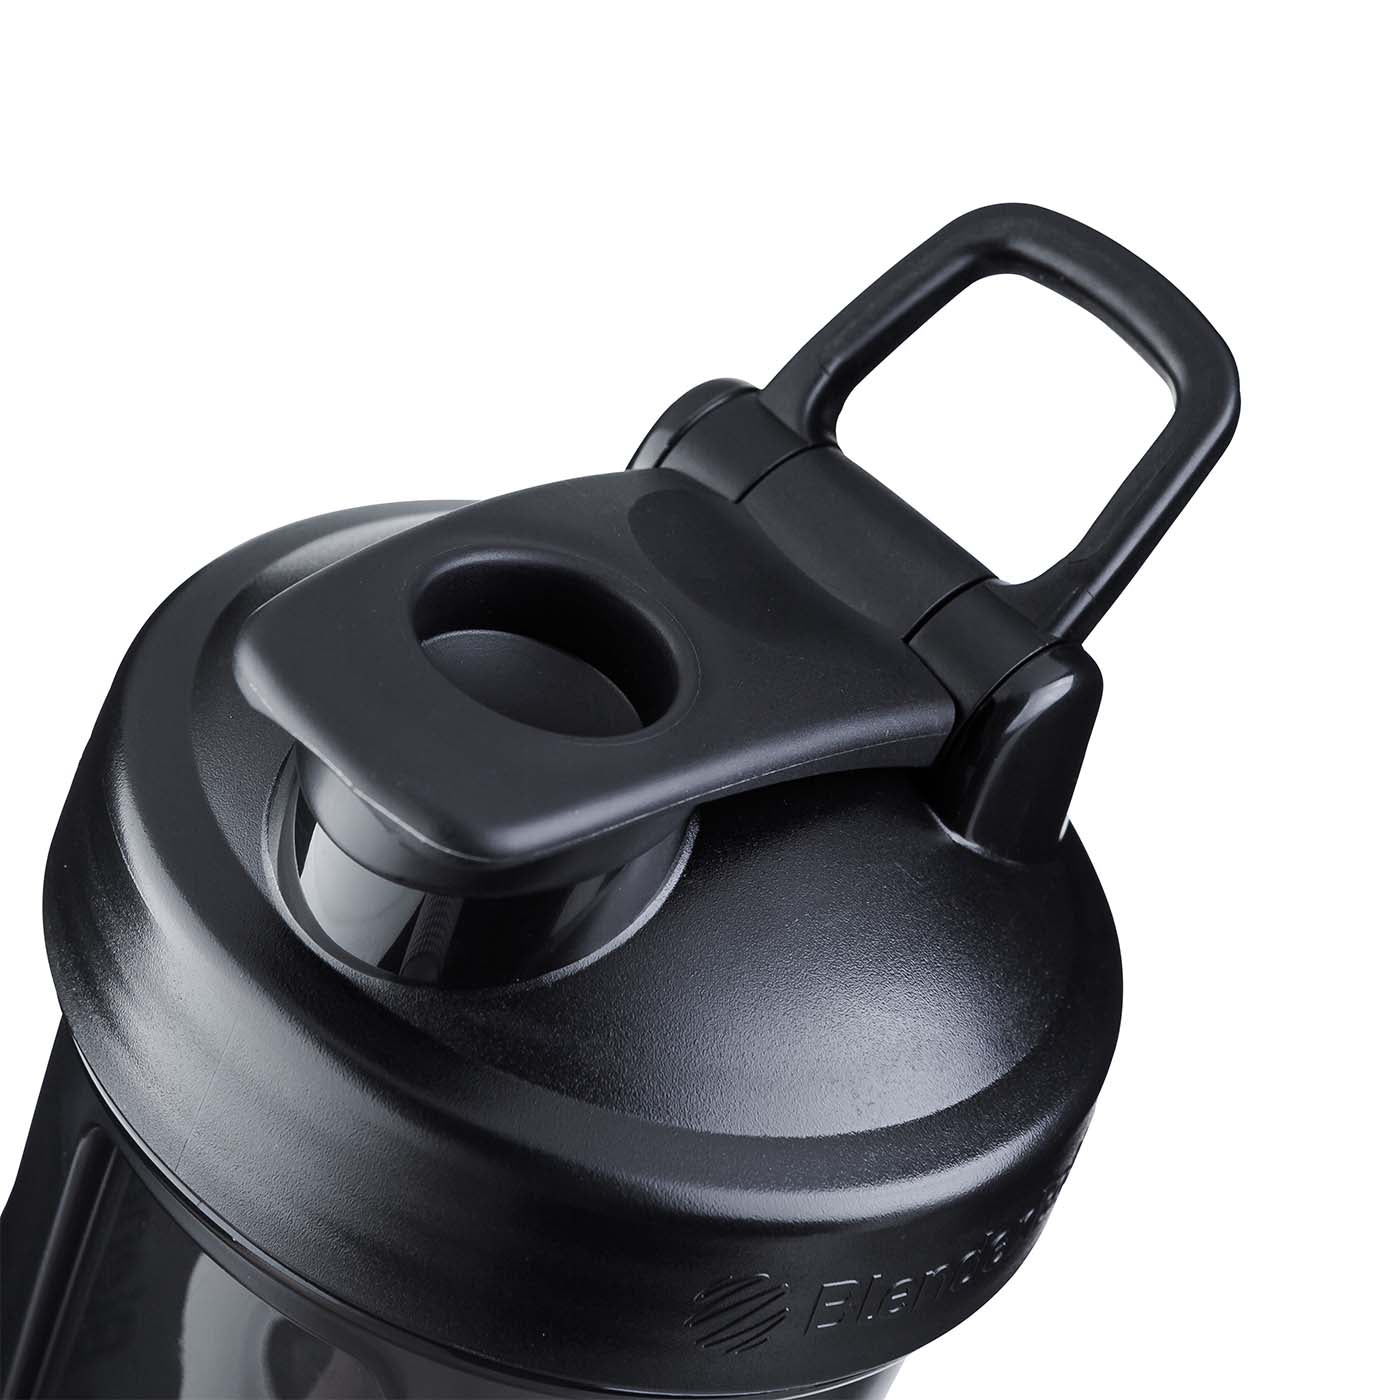 Black BlenderBottle shaker lid with flip cap, loop, and protected spout showcased. Practical and functional design highlighted. Neutral background.